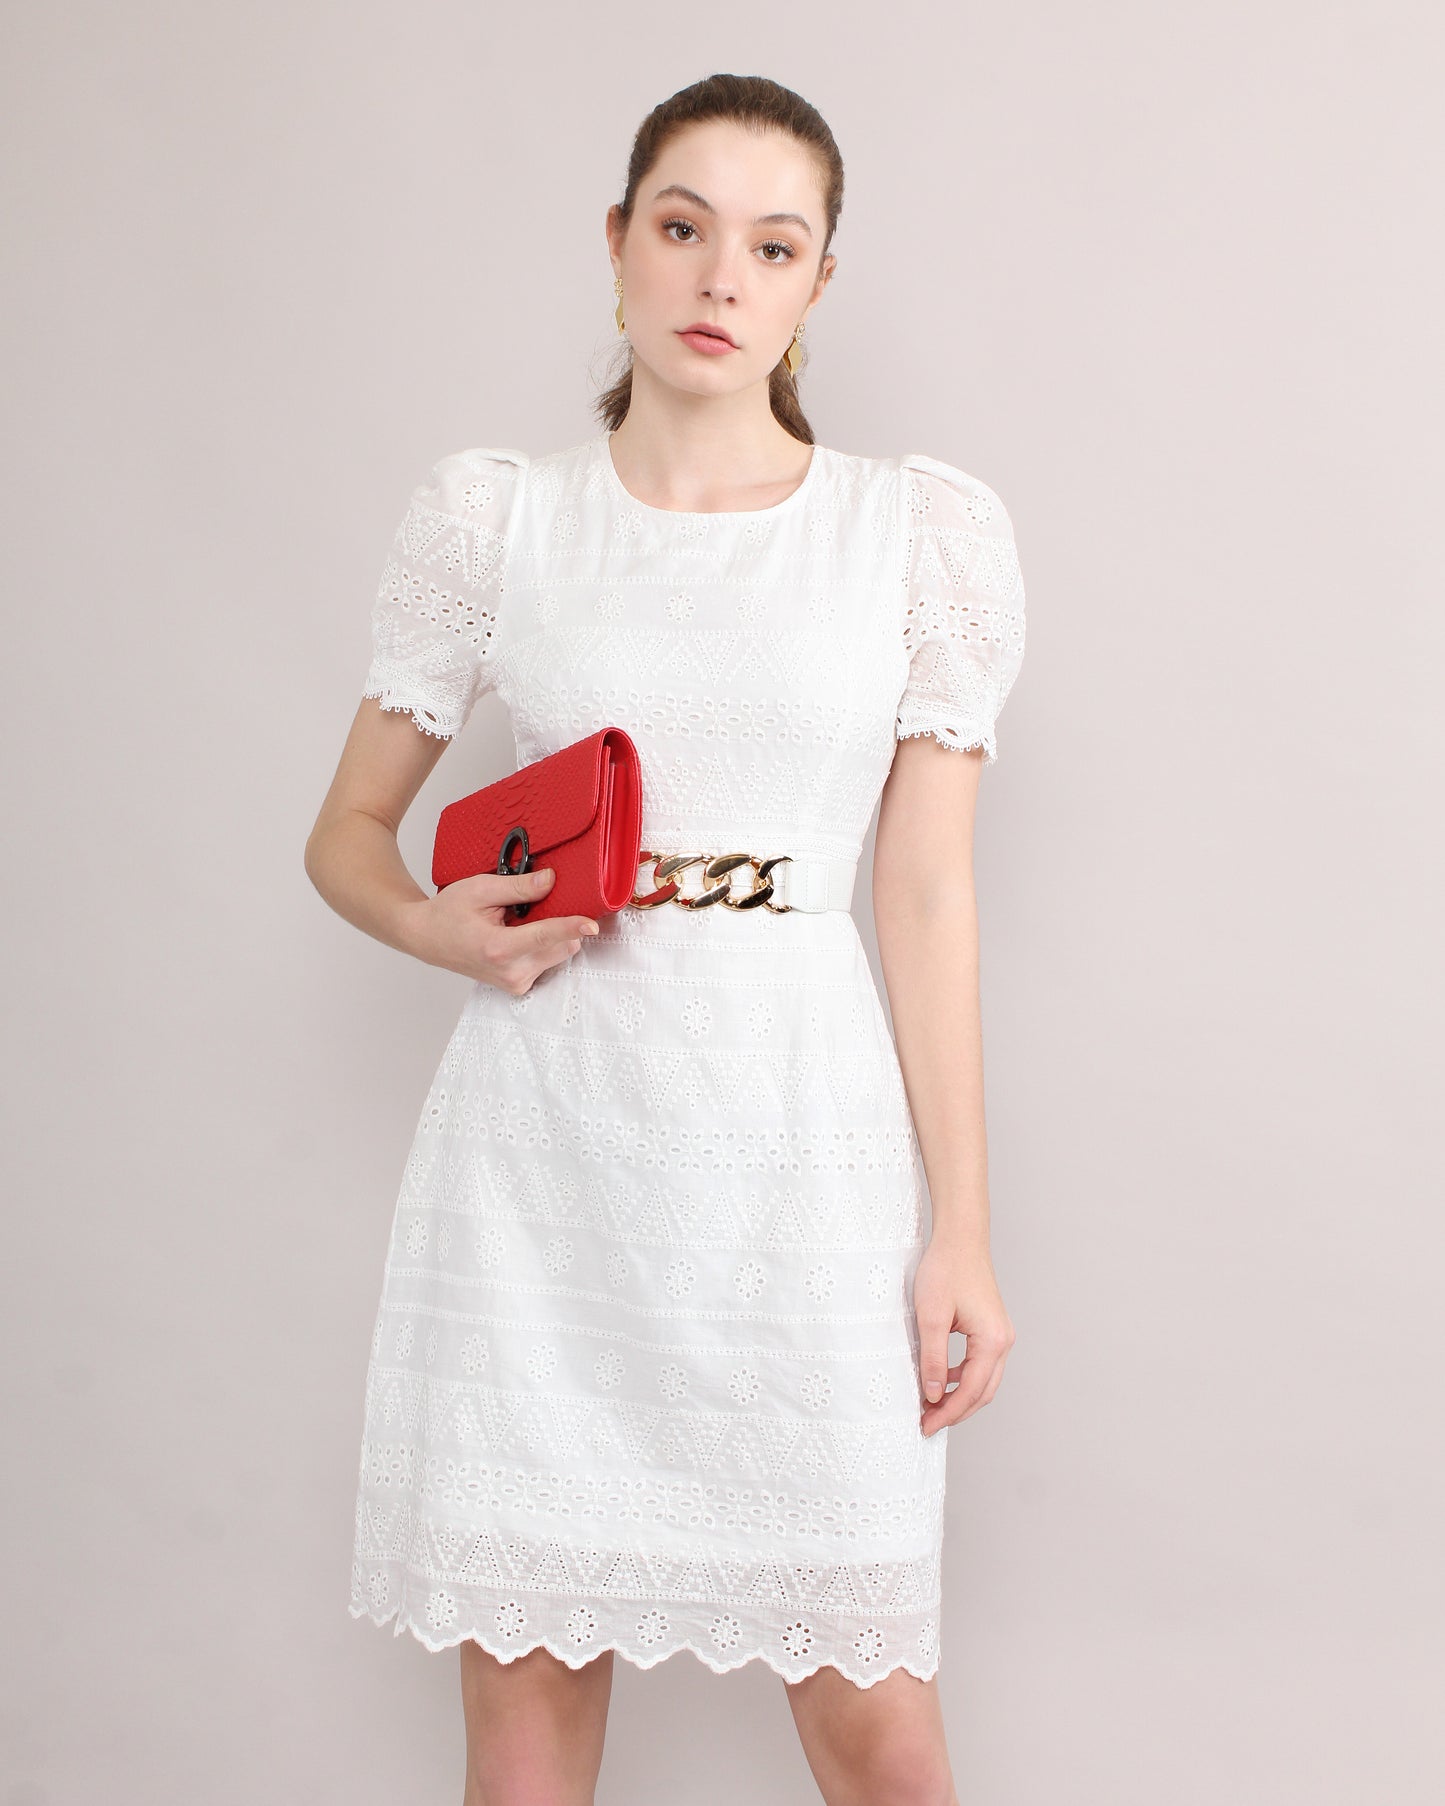 Jewel Neck Puffed Sleeve French Cotton Lace Dress